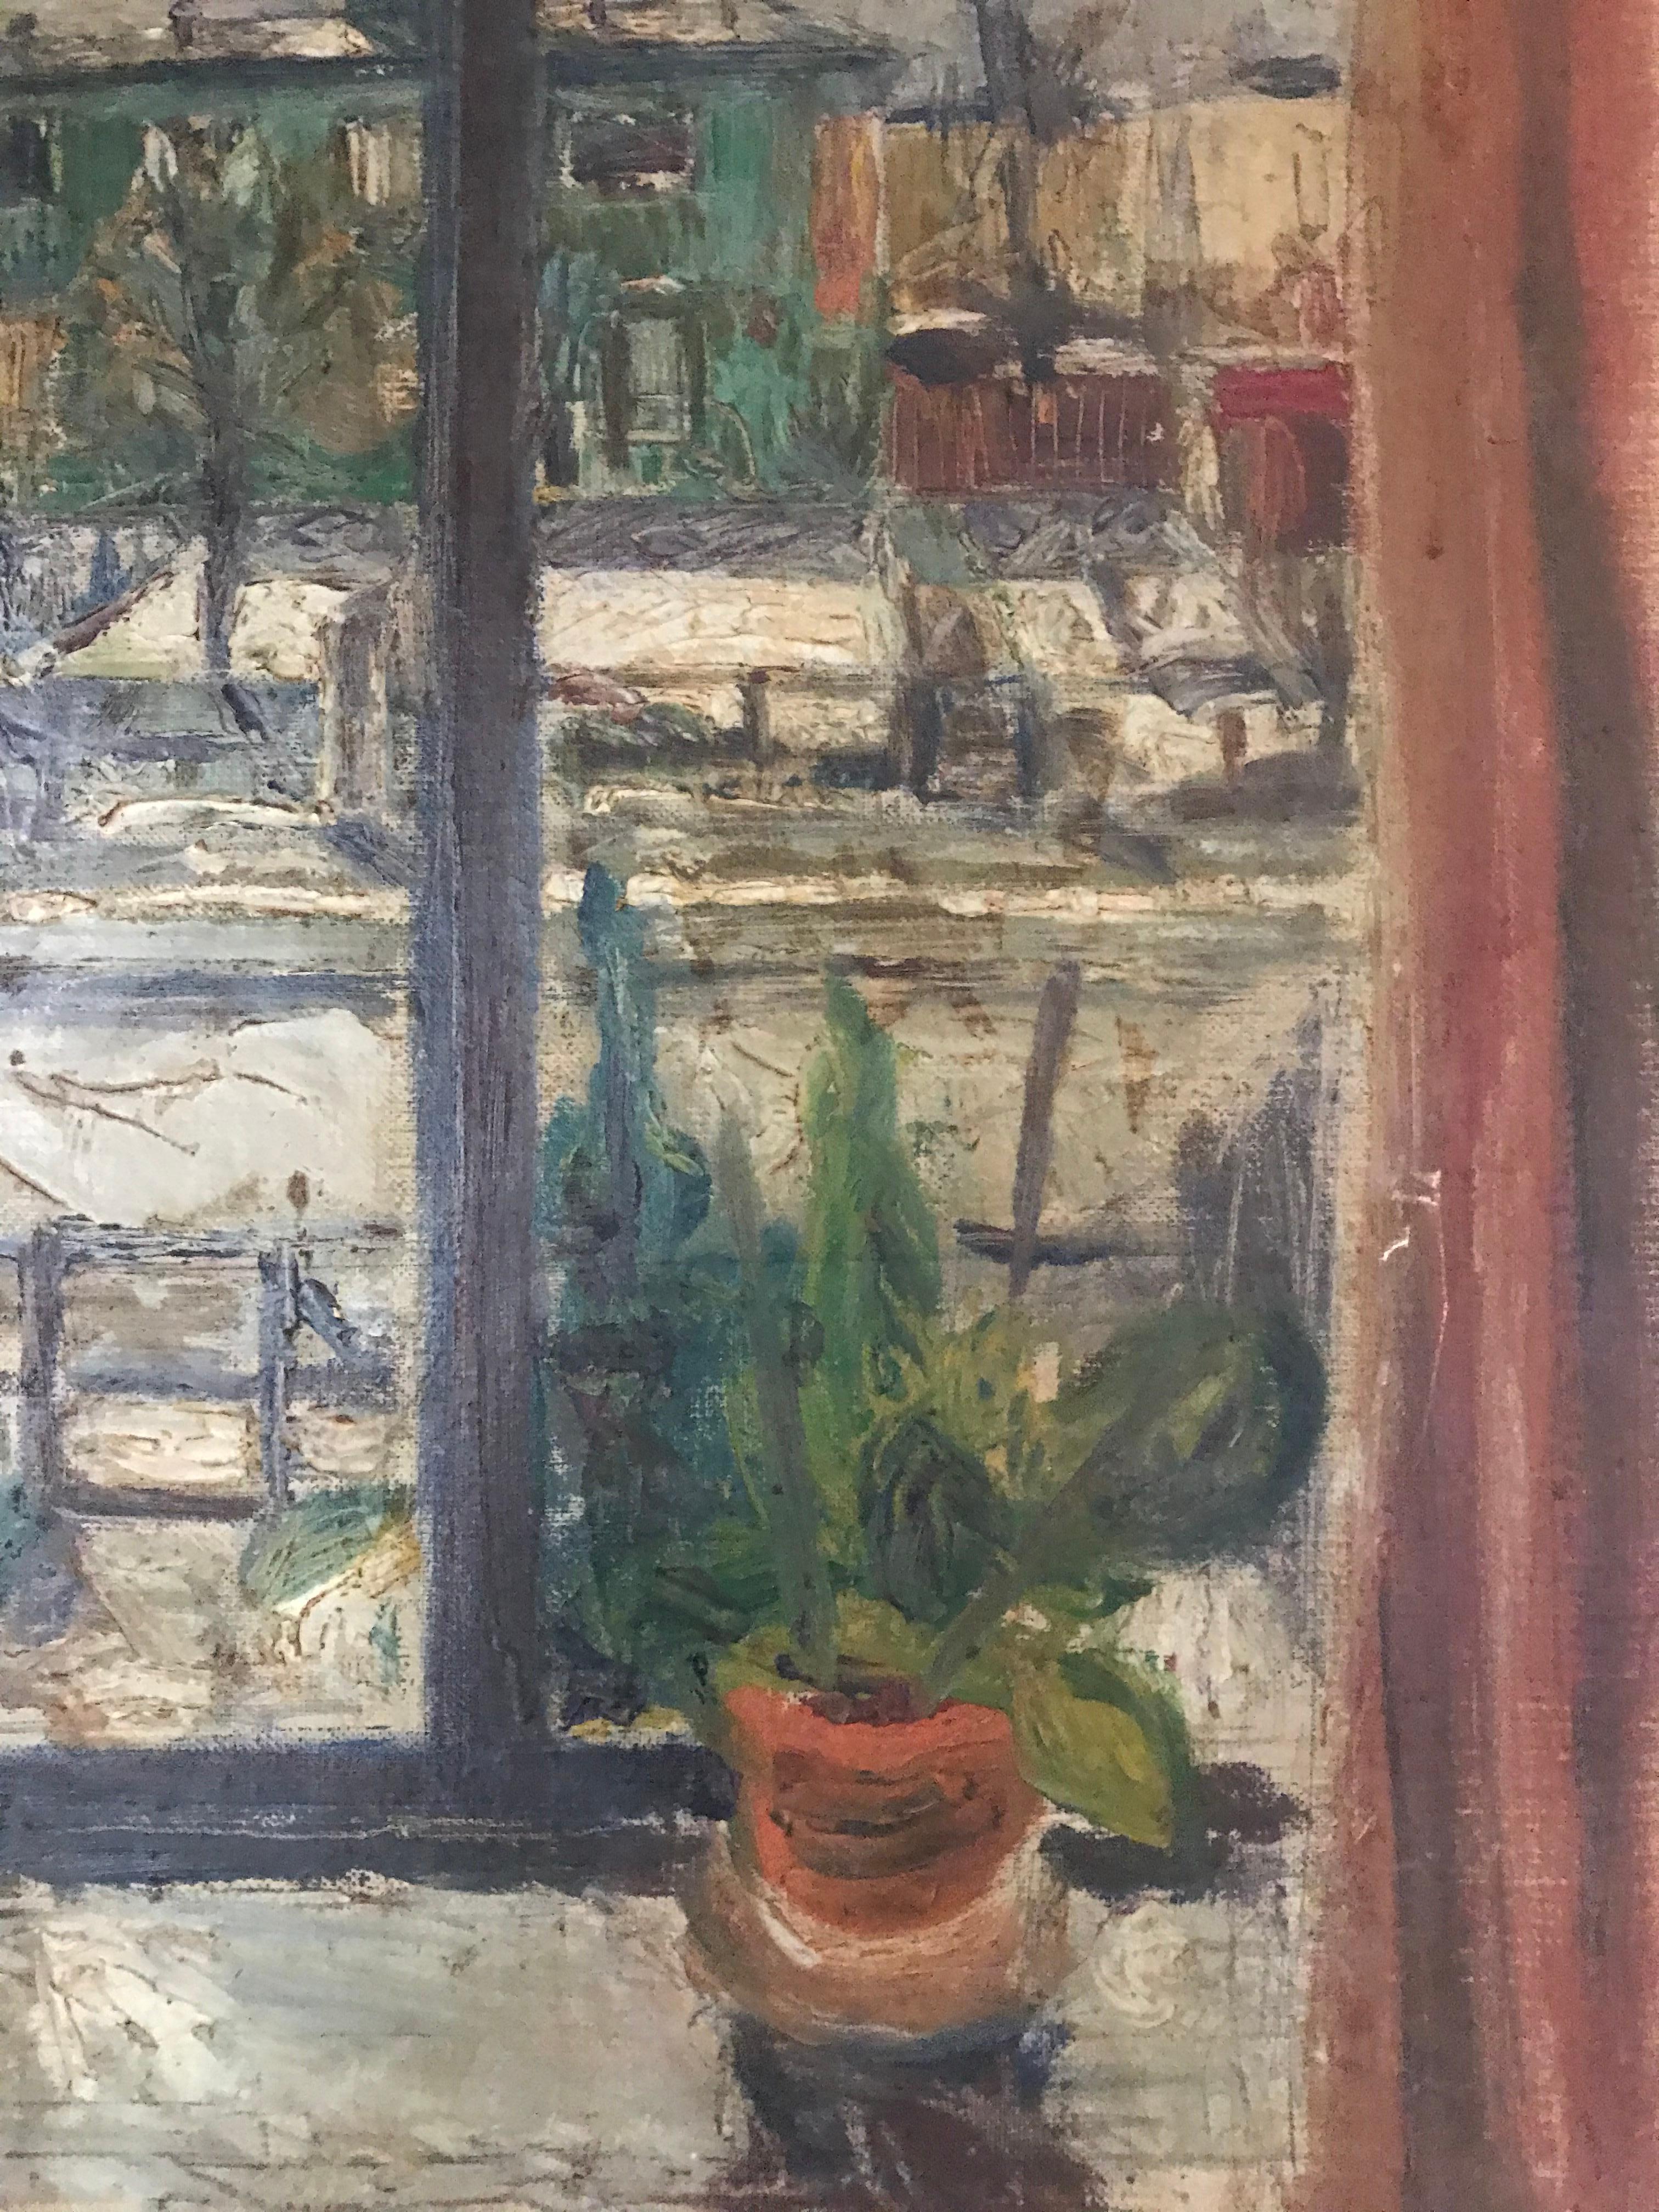 Mid-20th Century Expressionist Cityscape Window Painting by Olav Mathiesen, 1944 For Sale